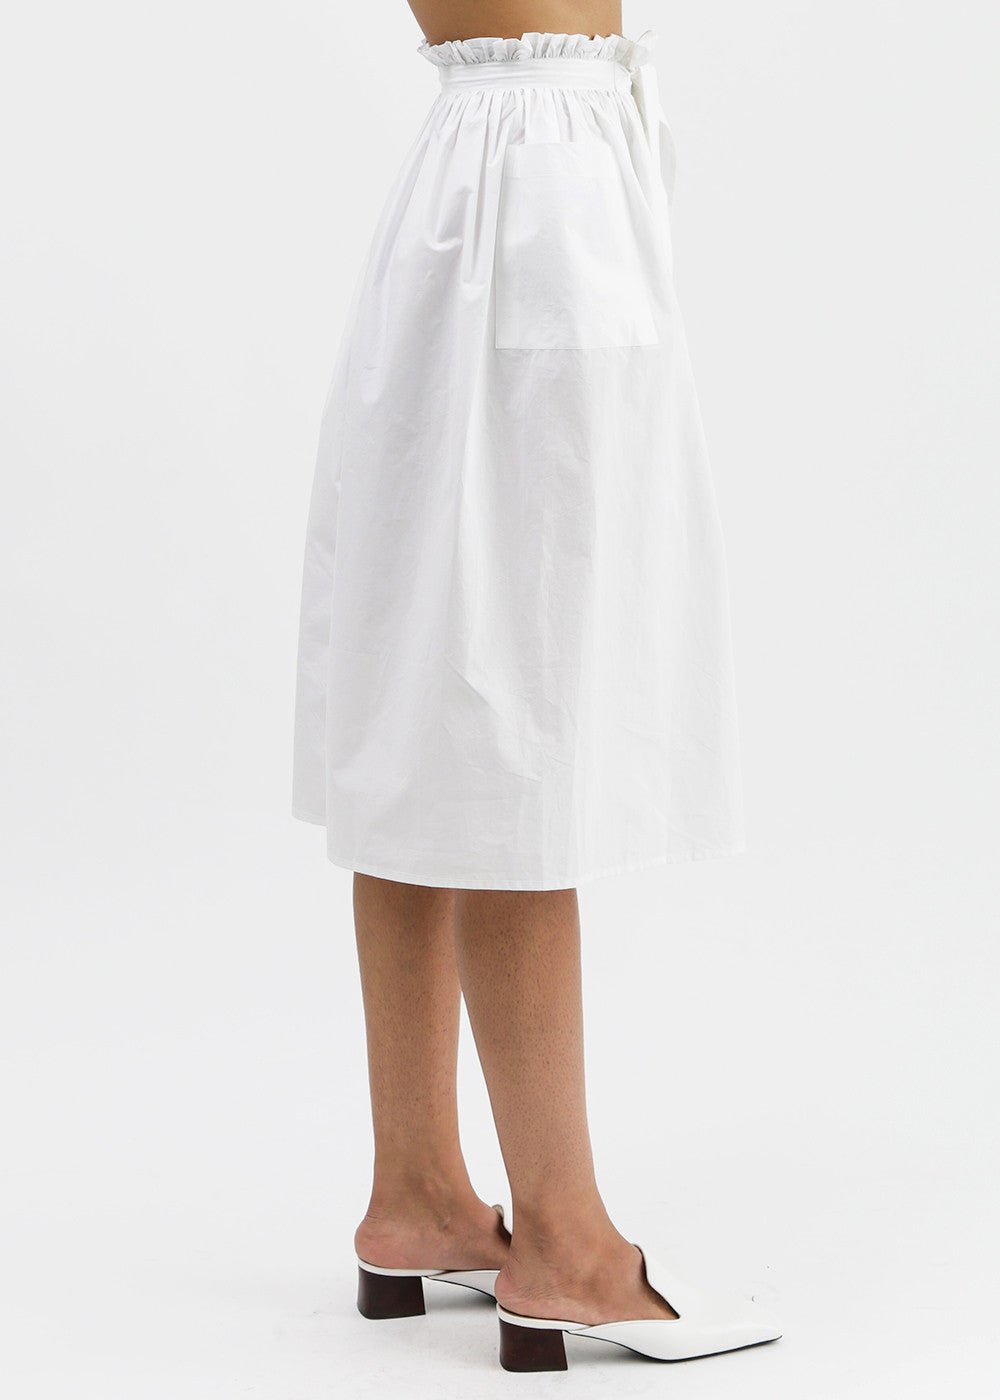 WRAY Town Skirt - New Classics Studios Sustainable Ethical Fashion Canada